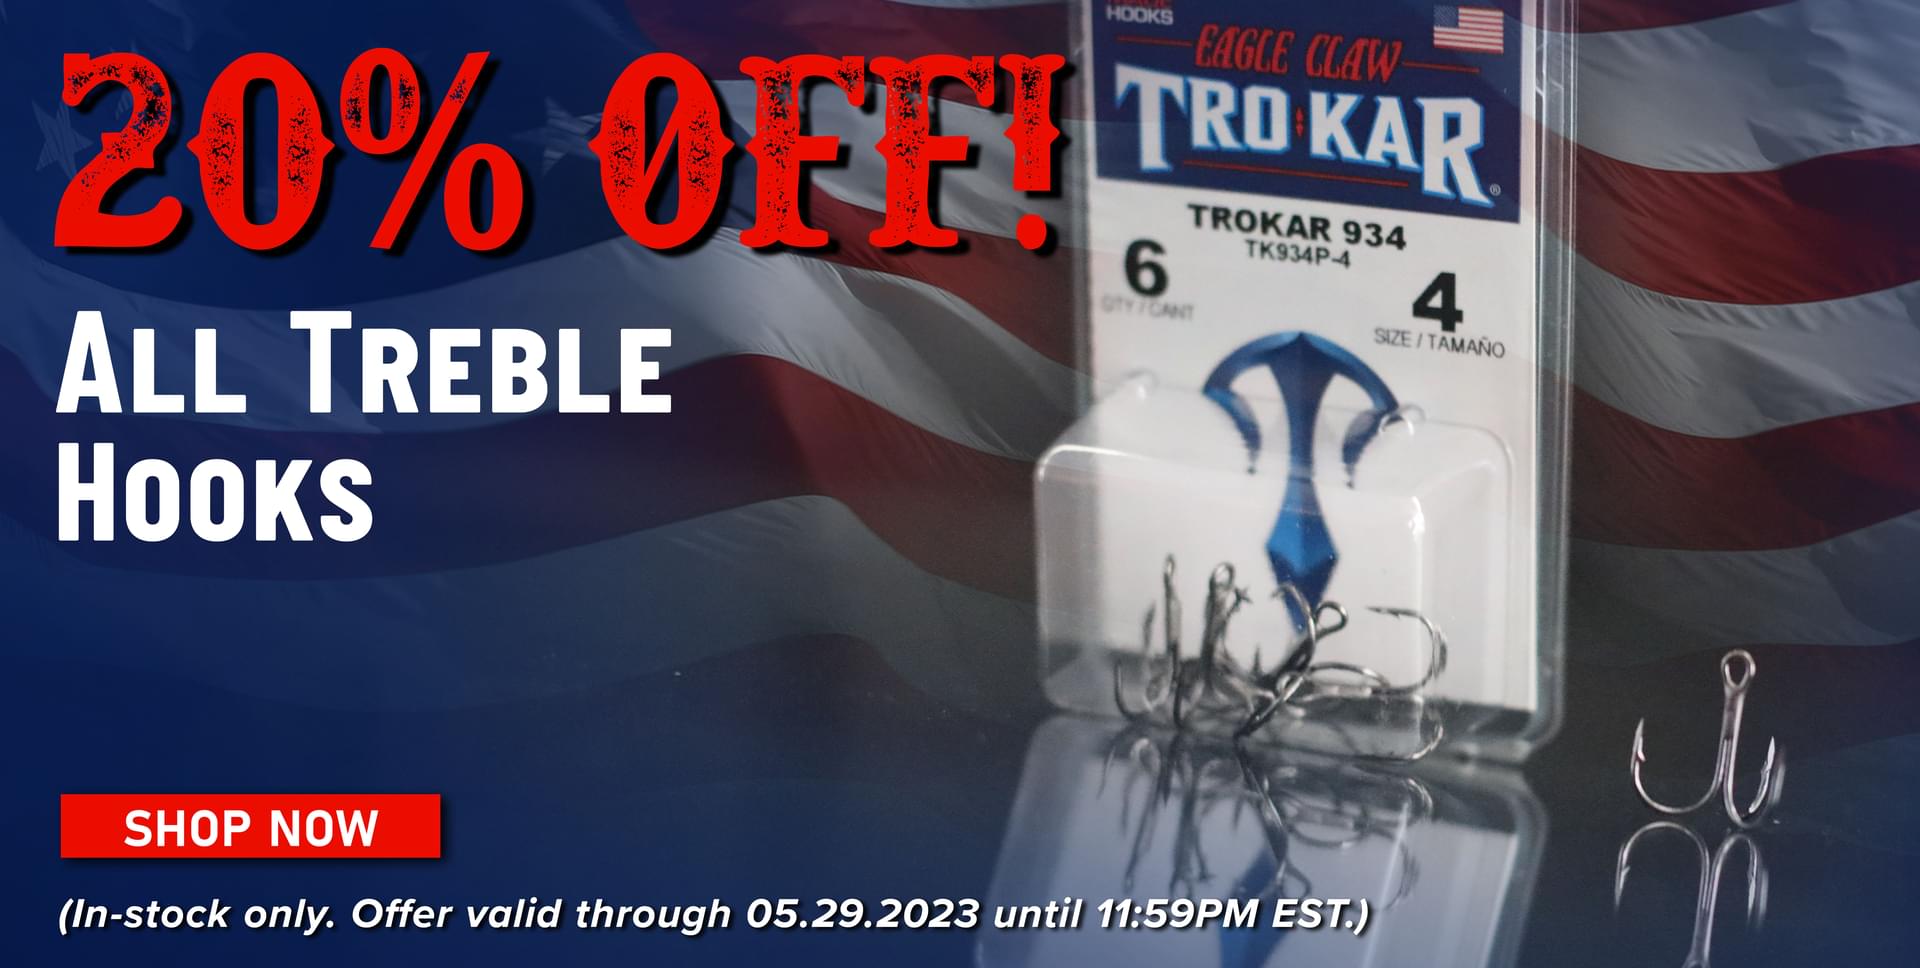 20% Off! All Treble Hooks Shop Now (In-stock only. Offer valid 05.29.2023 until 11:59PM EST.)